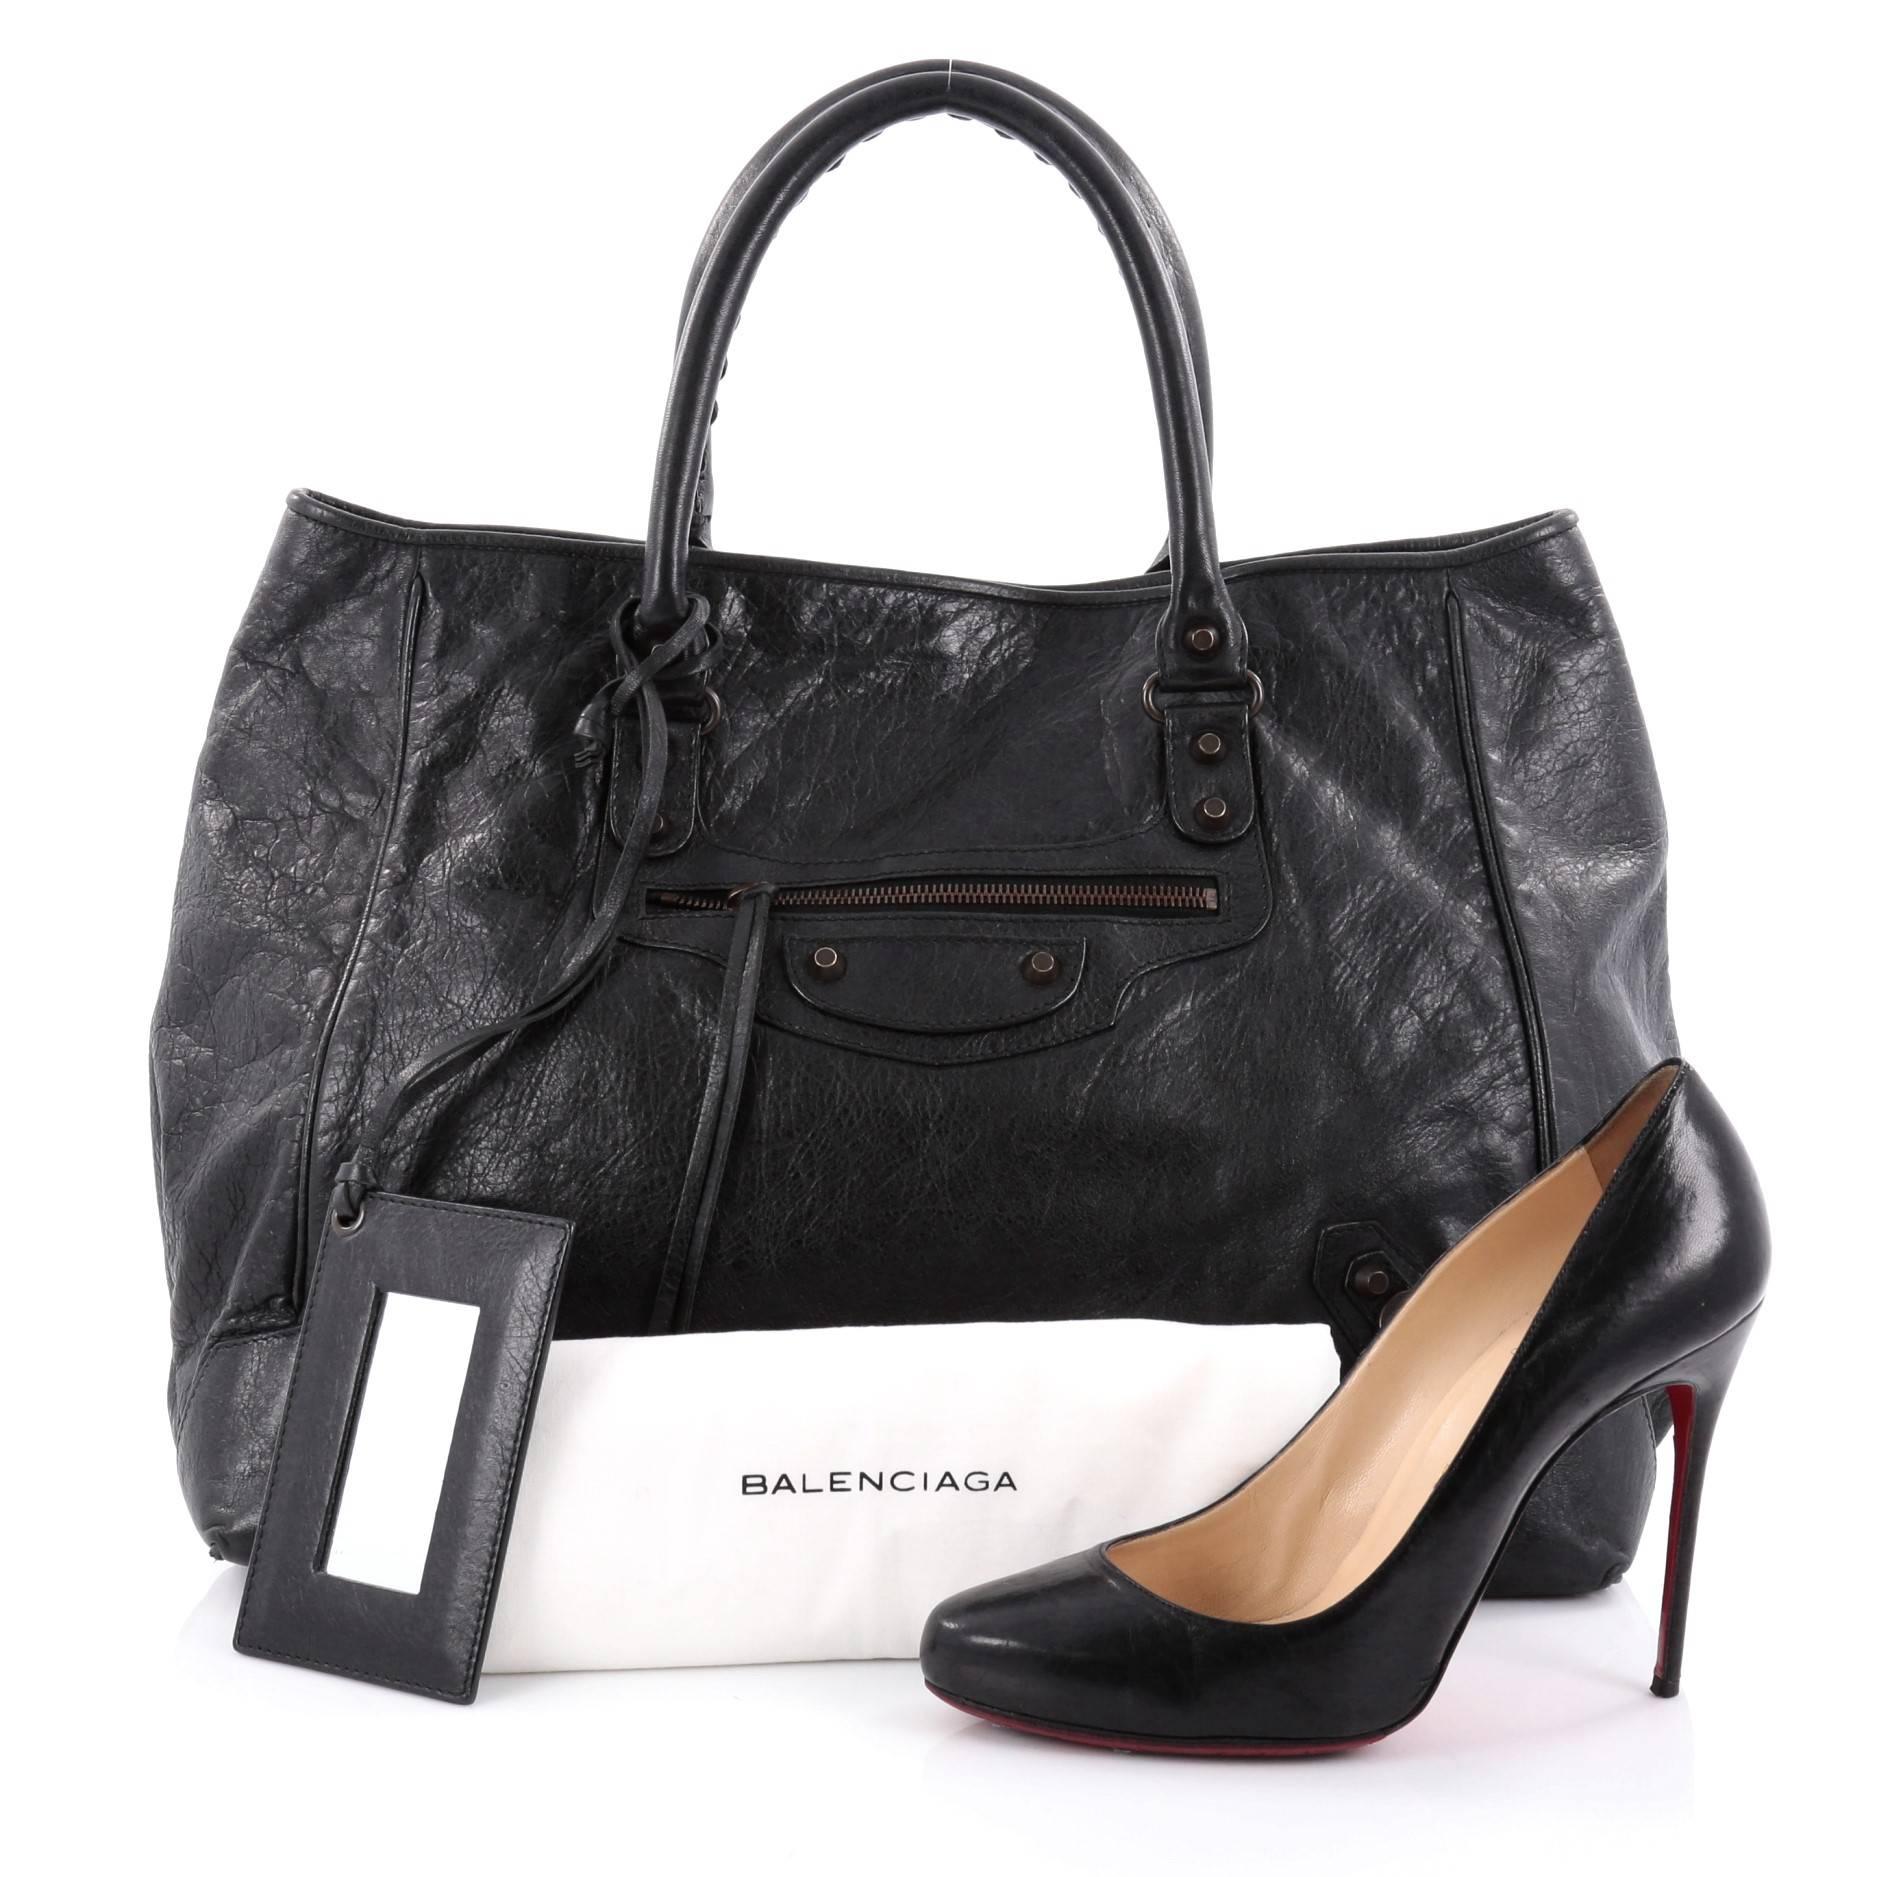 This unique Balenciaga Sunday Tote Classic Studs Leather Small is stylish and beautiful in design, made for everyday use. Constructed in black leather, this tote features dual-rolled braided handles, signature Balenciaga buckle and classic studs